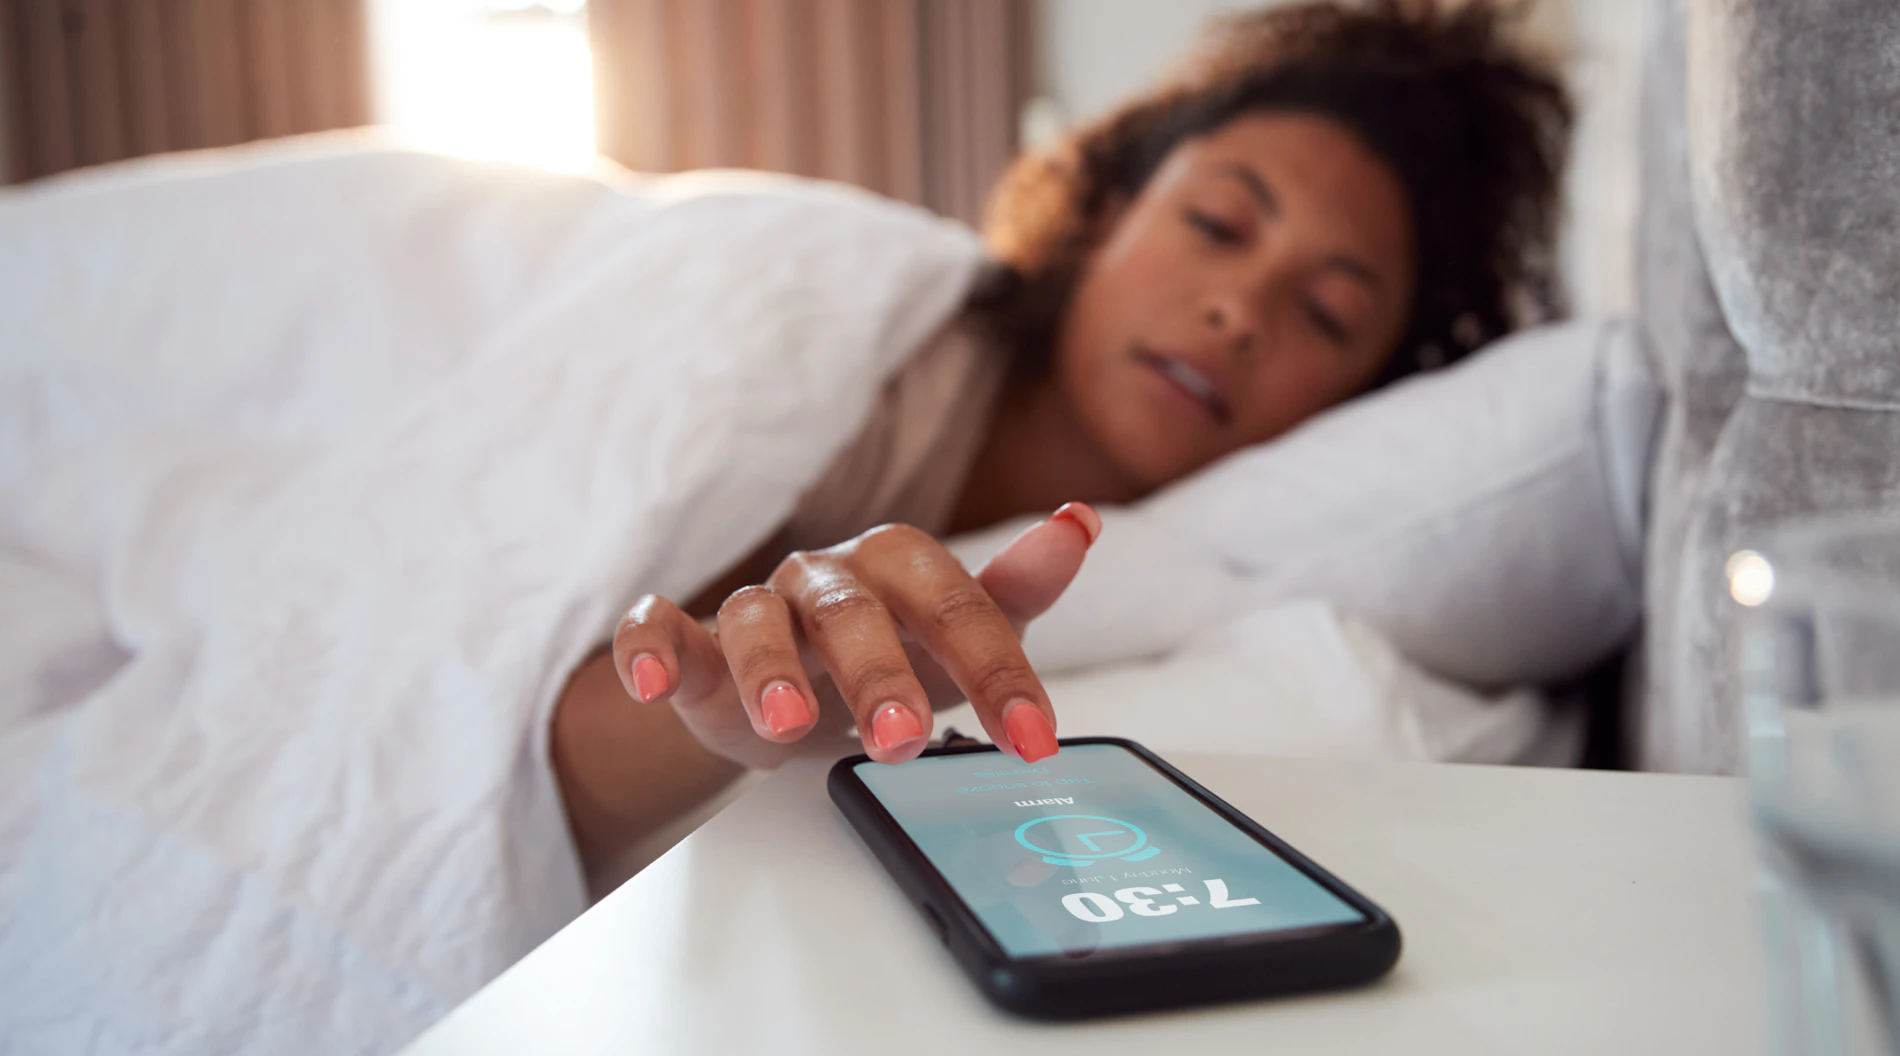 Woman in bed, turning off alarm clock on phone.